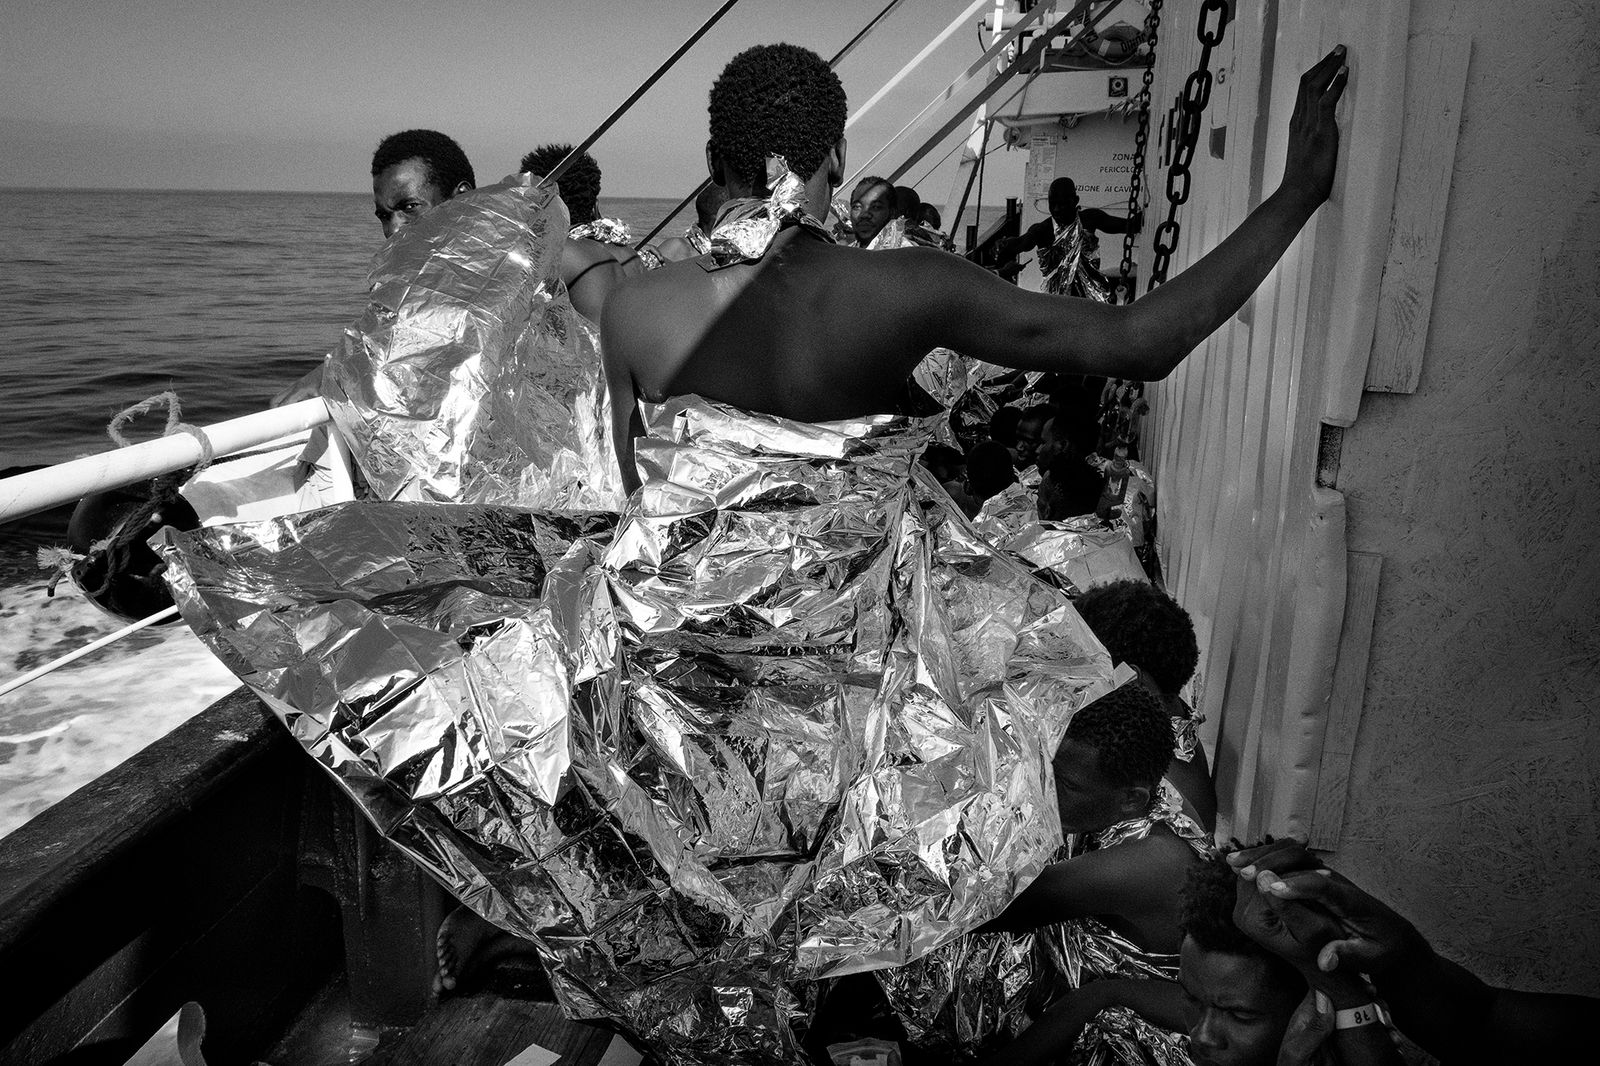 © Francesco Bellina - A migrant, on board the ship "Mare Jonio", wears the thermal blanket, after the rescue.  